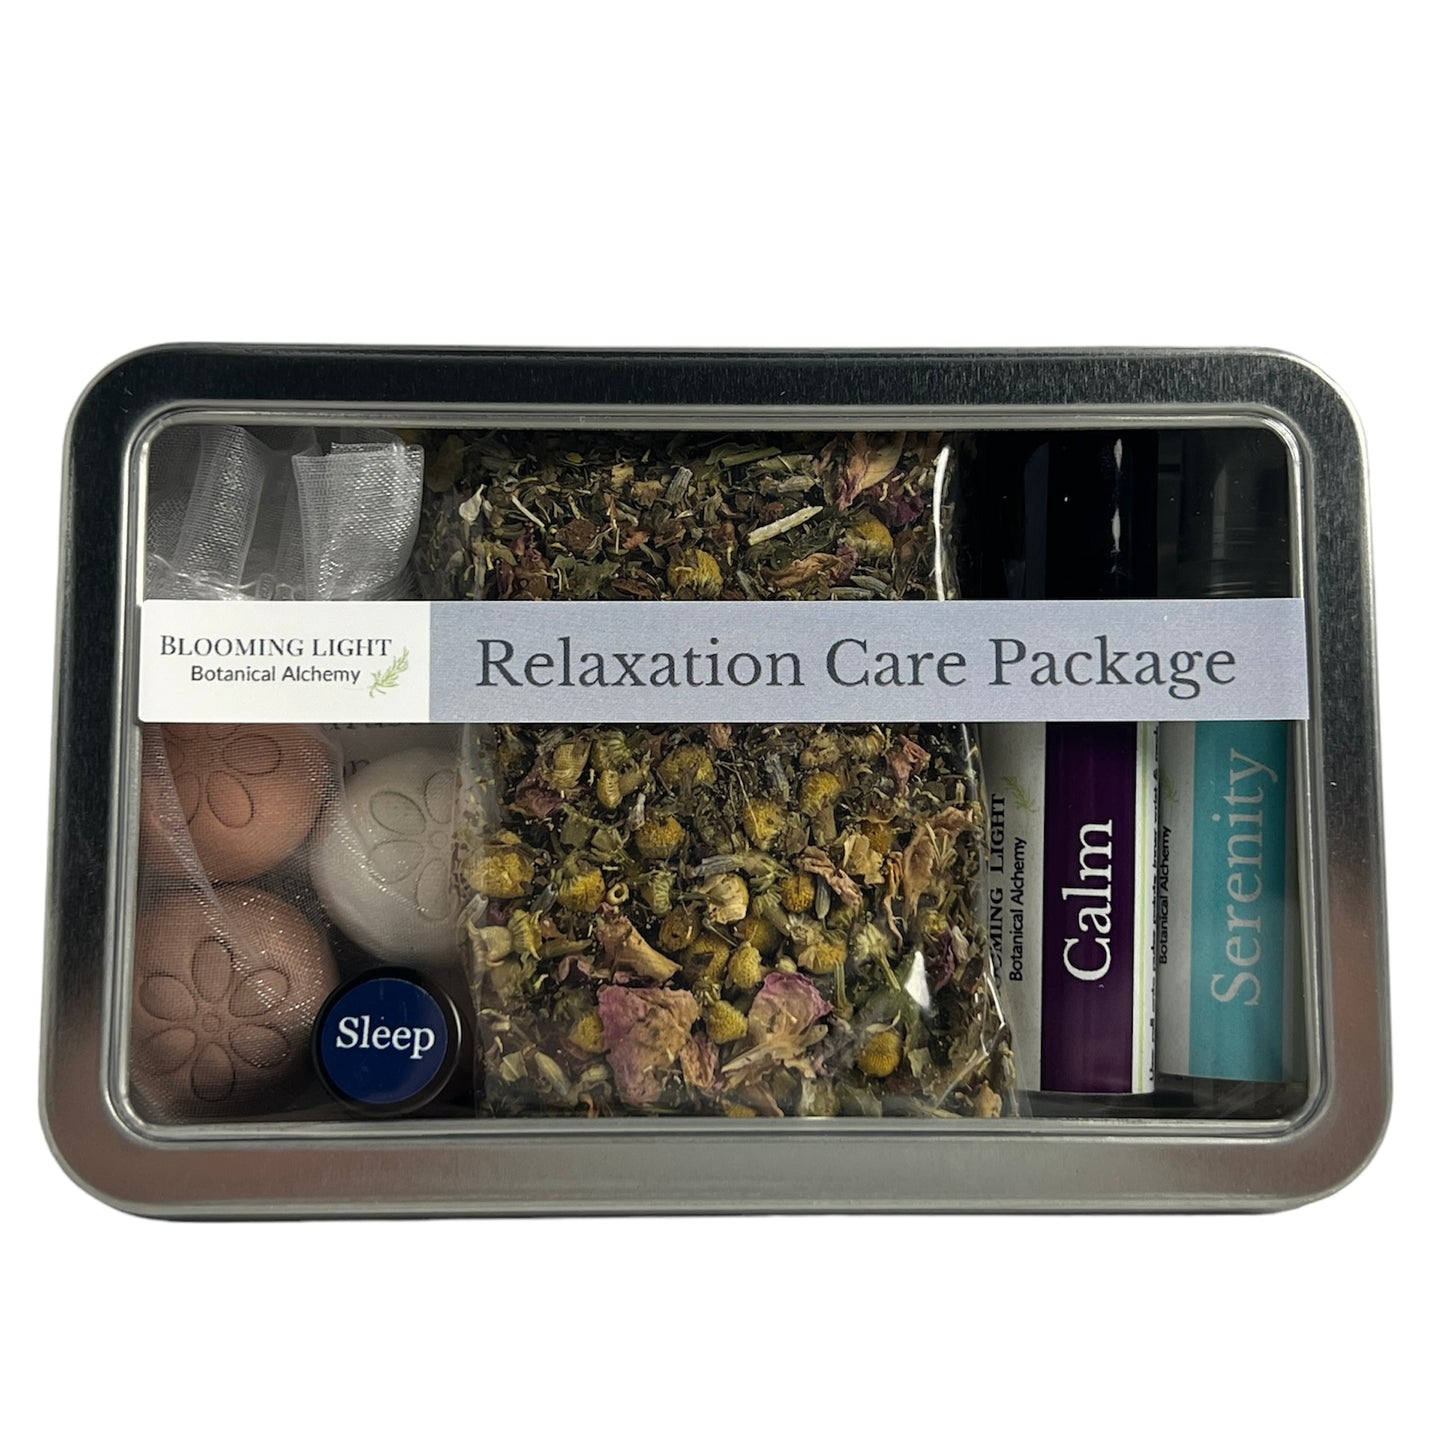 Relaxation Care Package